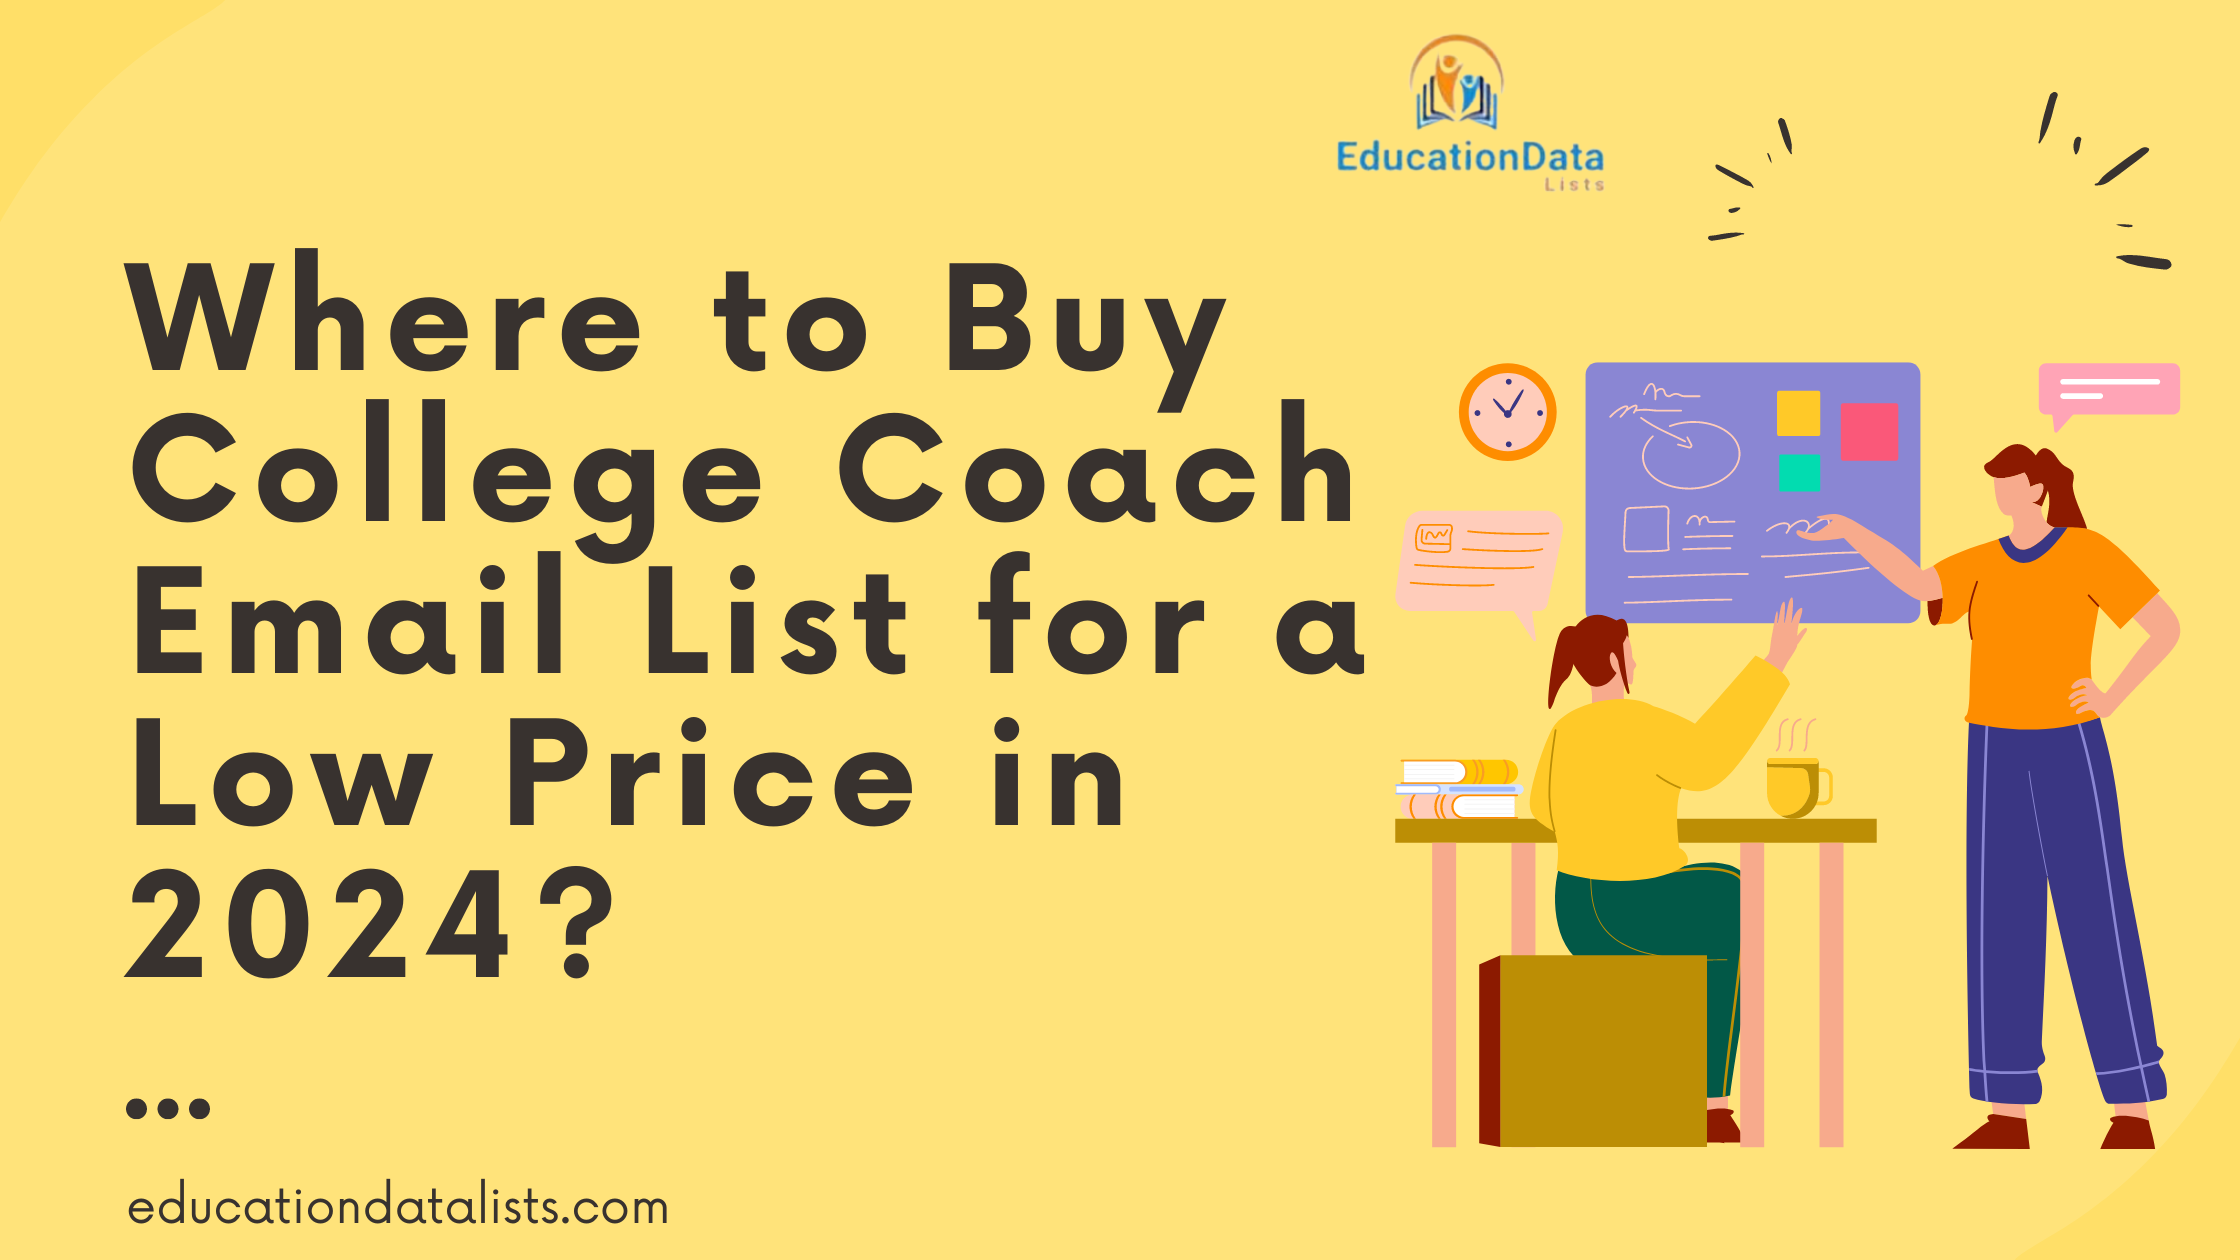 Where to Buy College Coach Email List for a Low Price in 2024?